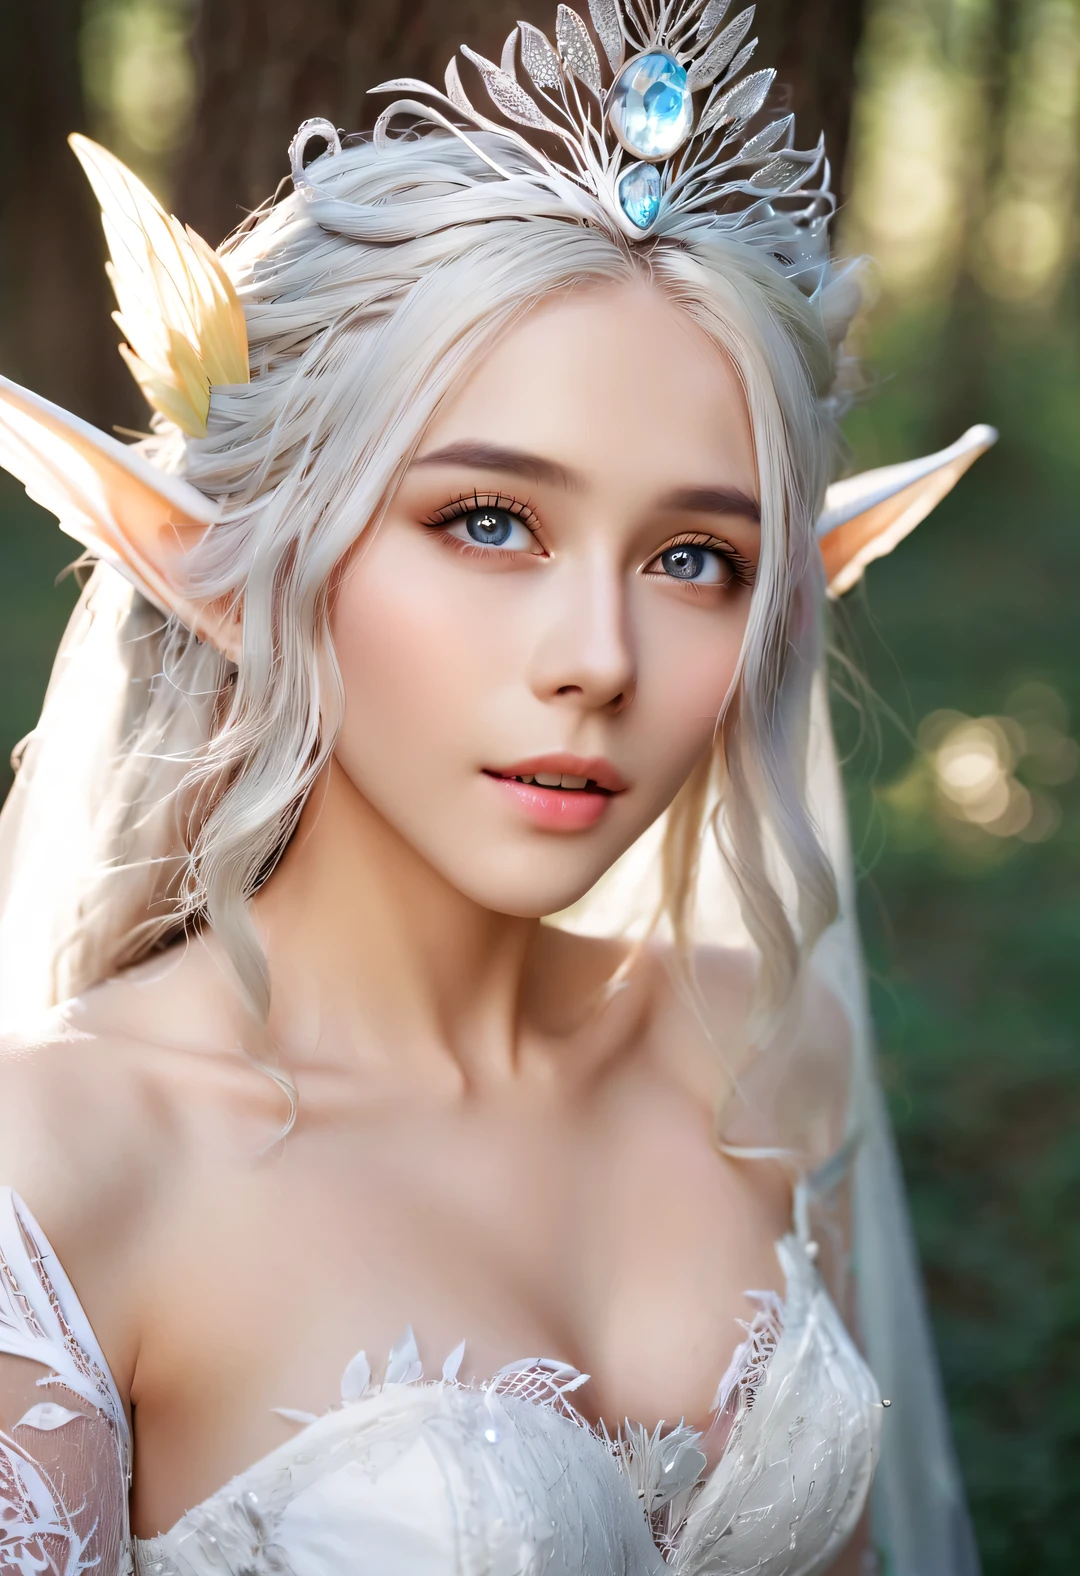 (Bust close-up portrait), Young beautiful light elf sparkling, sparkling，It looks very beautiful. They are usually mild-mannered, happy and enthusiastic, Able to communicate with trees, Flowers and plants, fish and birds, Have the perfect figure, radiant skin, expressive eyes, High cheekbones, Delicate nose, bright smile, flowing hair, and wear an exquisite lace wedding dress, Forest background under moonlight,
Advertising style shoot, romantic wedding photography style, soft natural light, Shot with Canon AE-1 film camera, lens 50mm, F/1.8, light depth of field, pastel color palette, Very detailed, 8k,